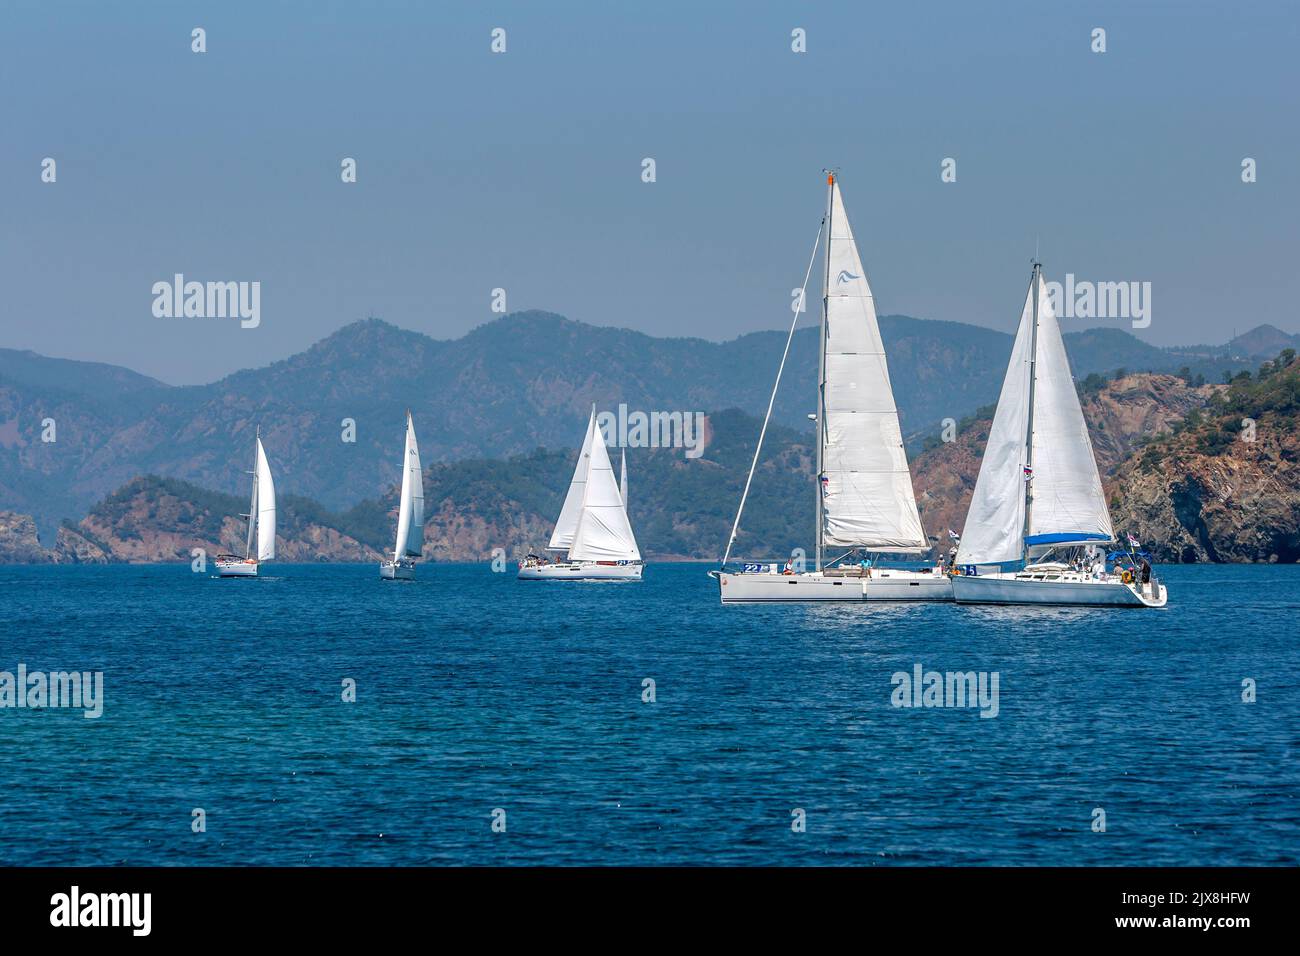 A fleet of sailing yachts  maneuver in the Aegean Sea  off the Turquoise coast of Turkey near the port city of Fethiye. Stock Photo